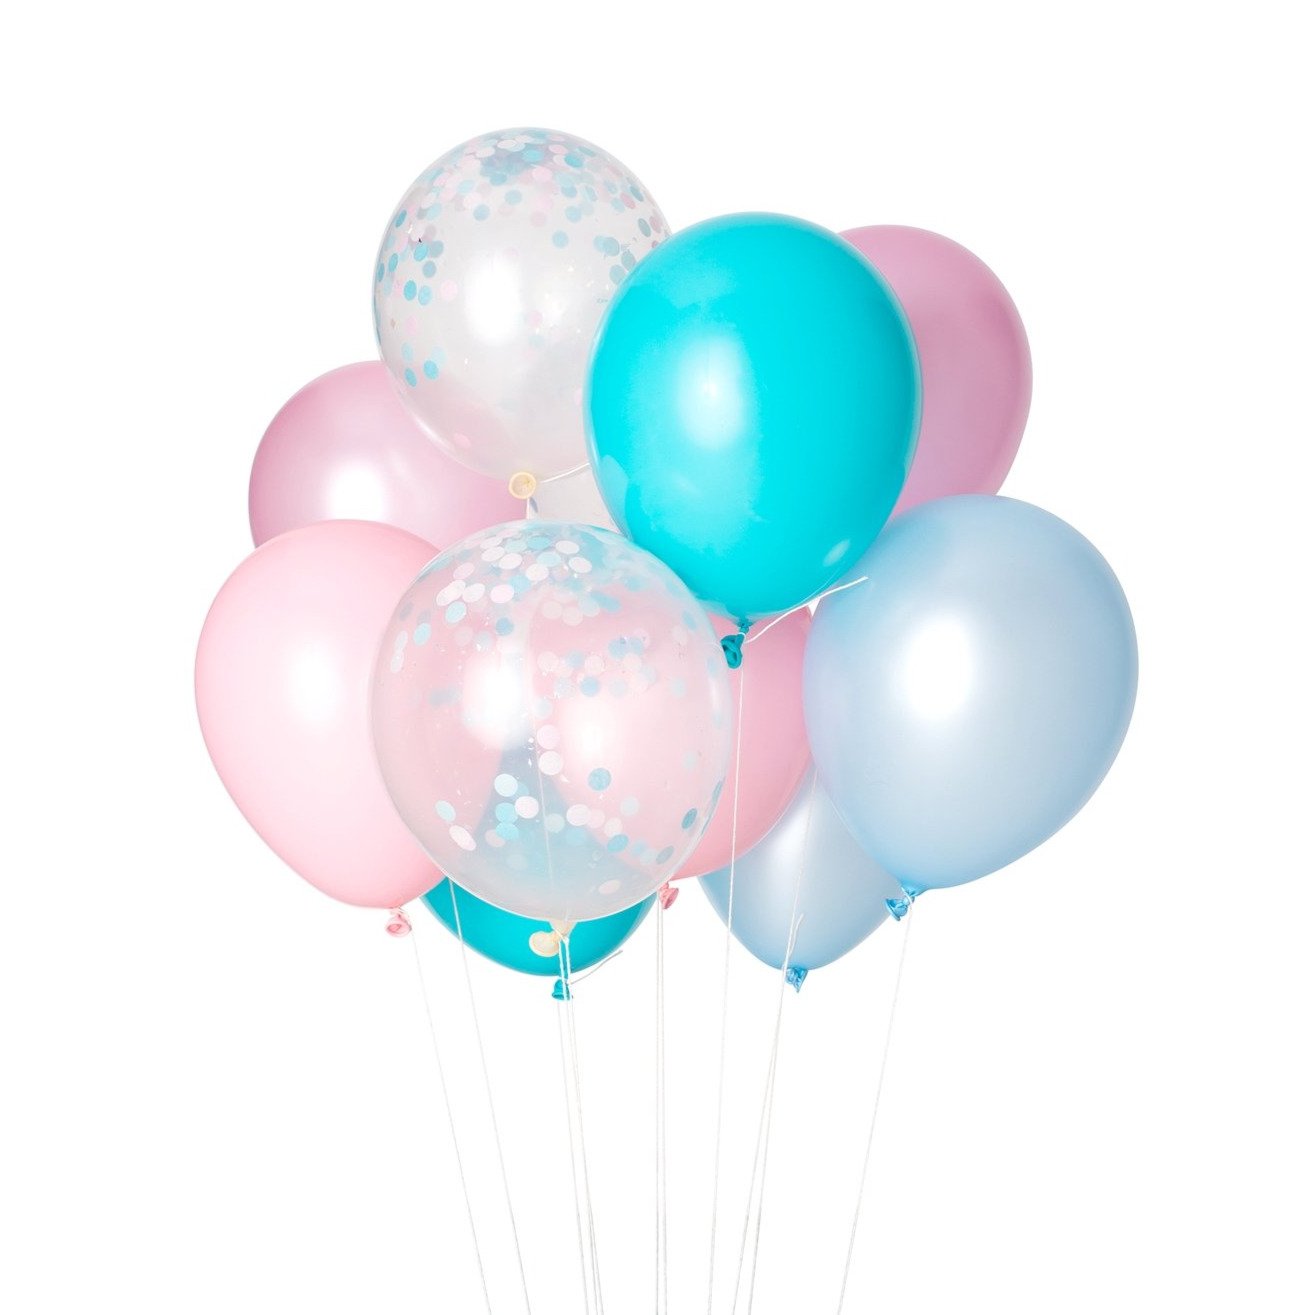 Ballons 'Cotton Candy' - Cuppin's